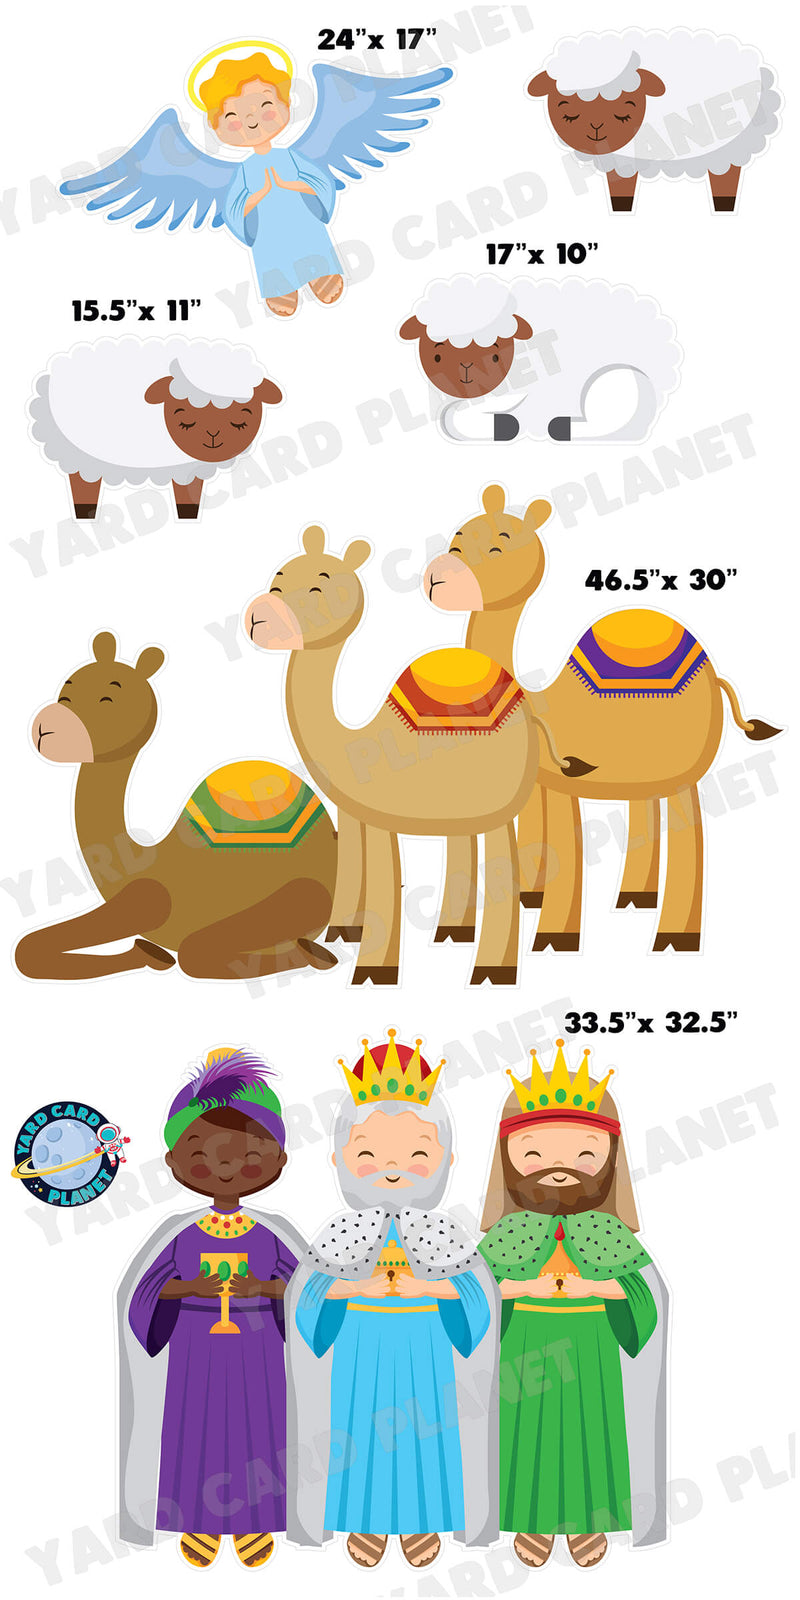 Large Complete Christmas Nativity Scene Yard Card Flair Set - Part 2